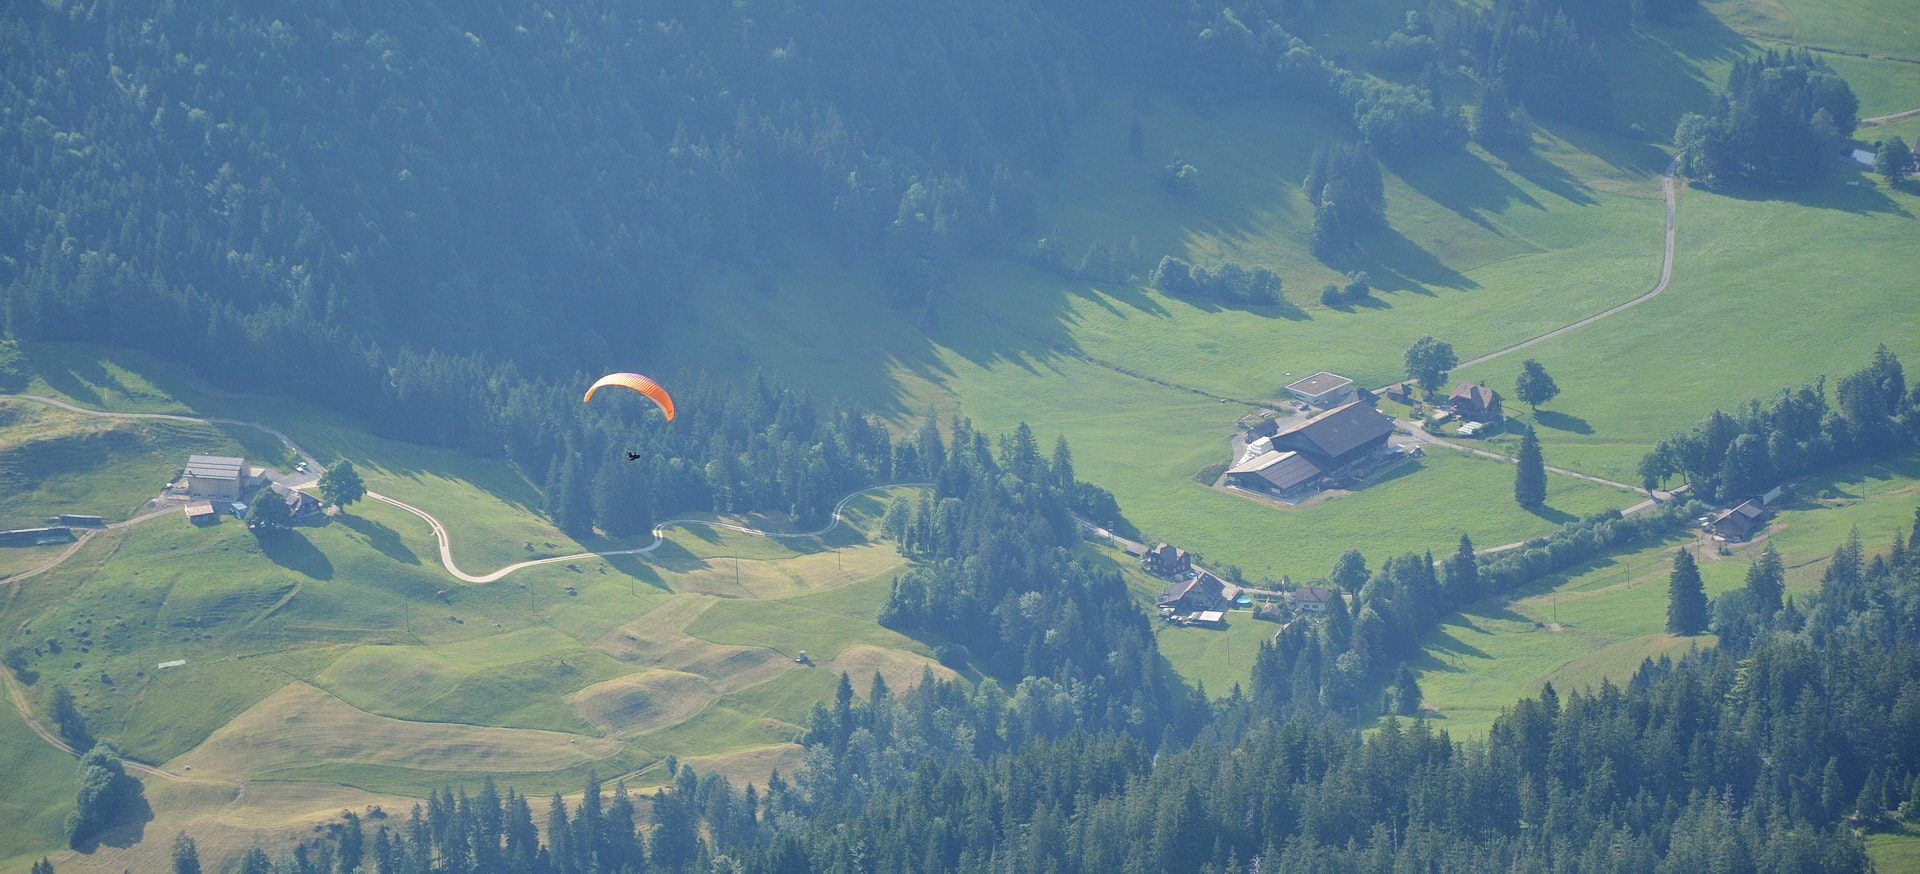 Mt. Pilatus is a popular starting point for paragliders